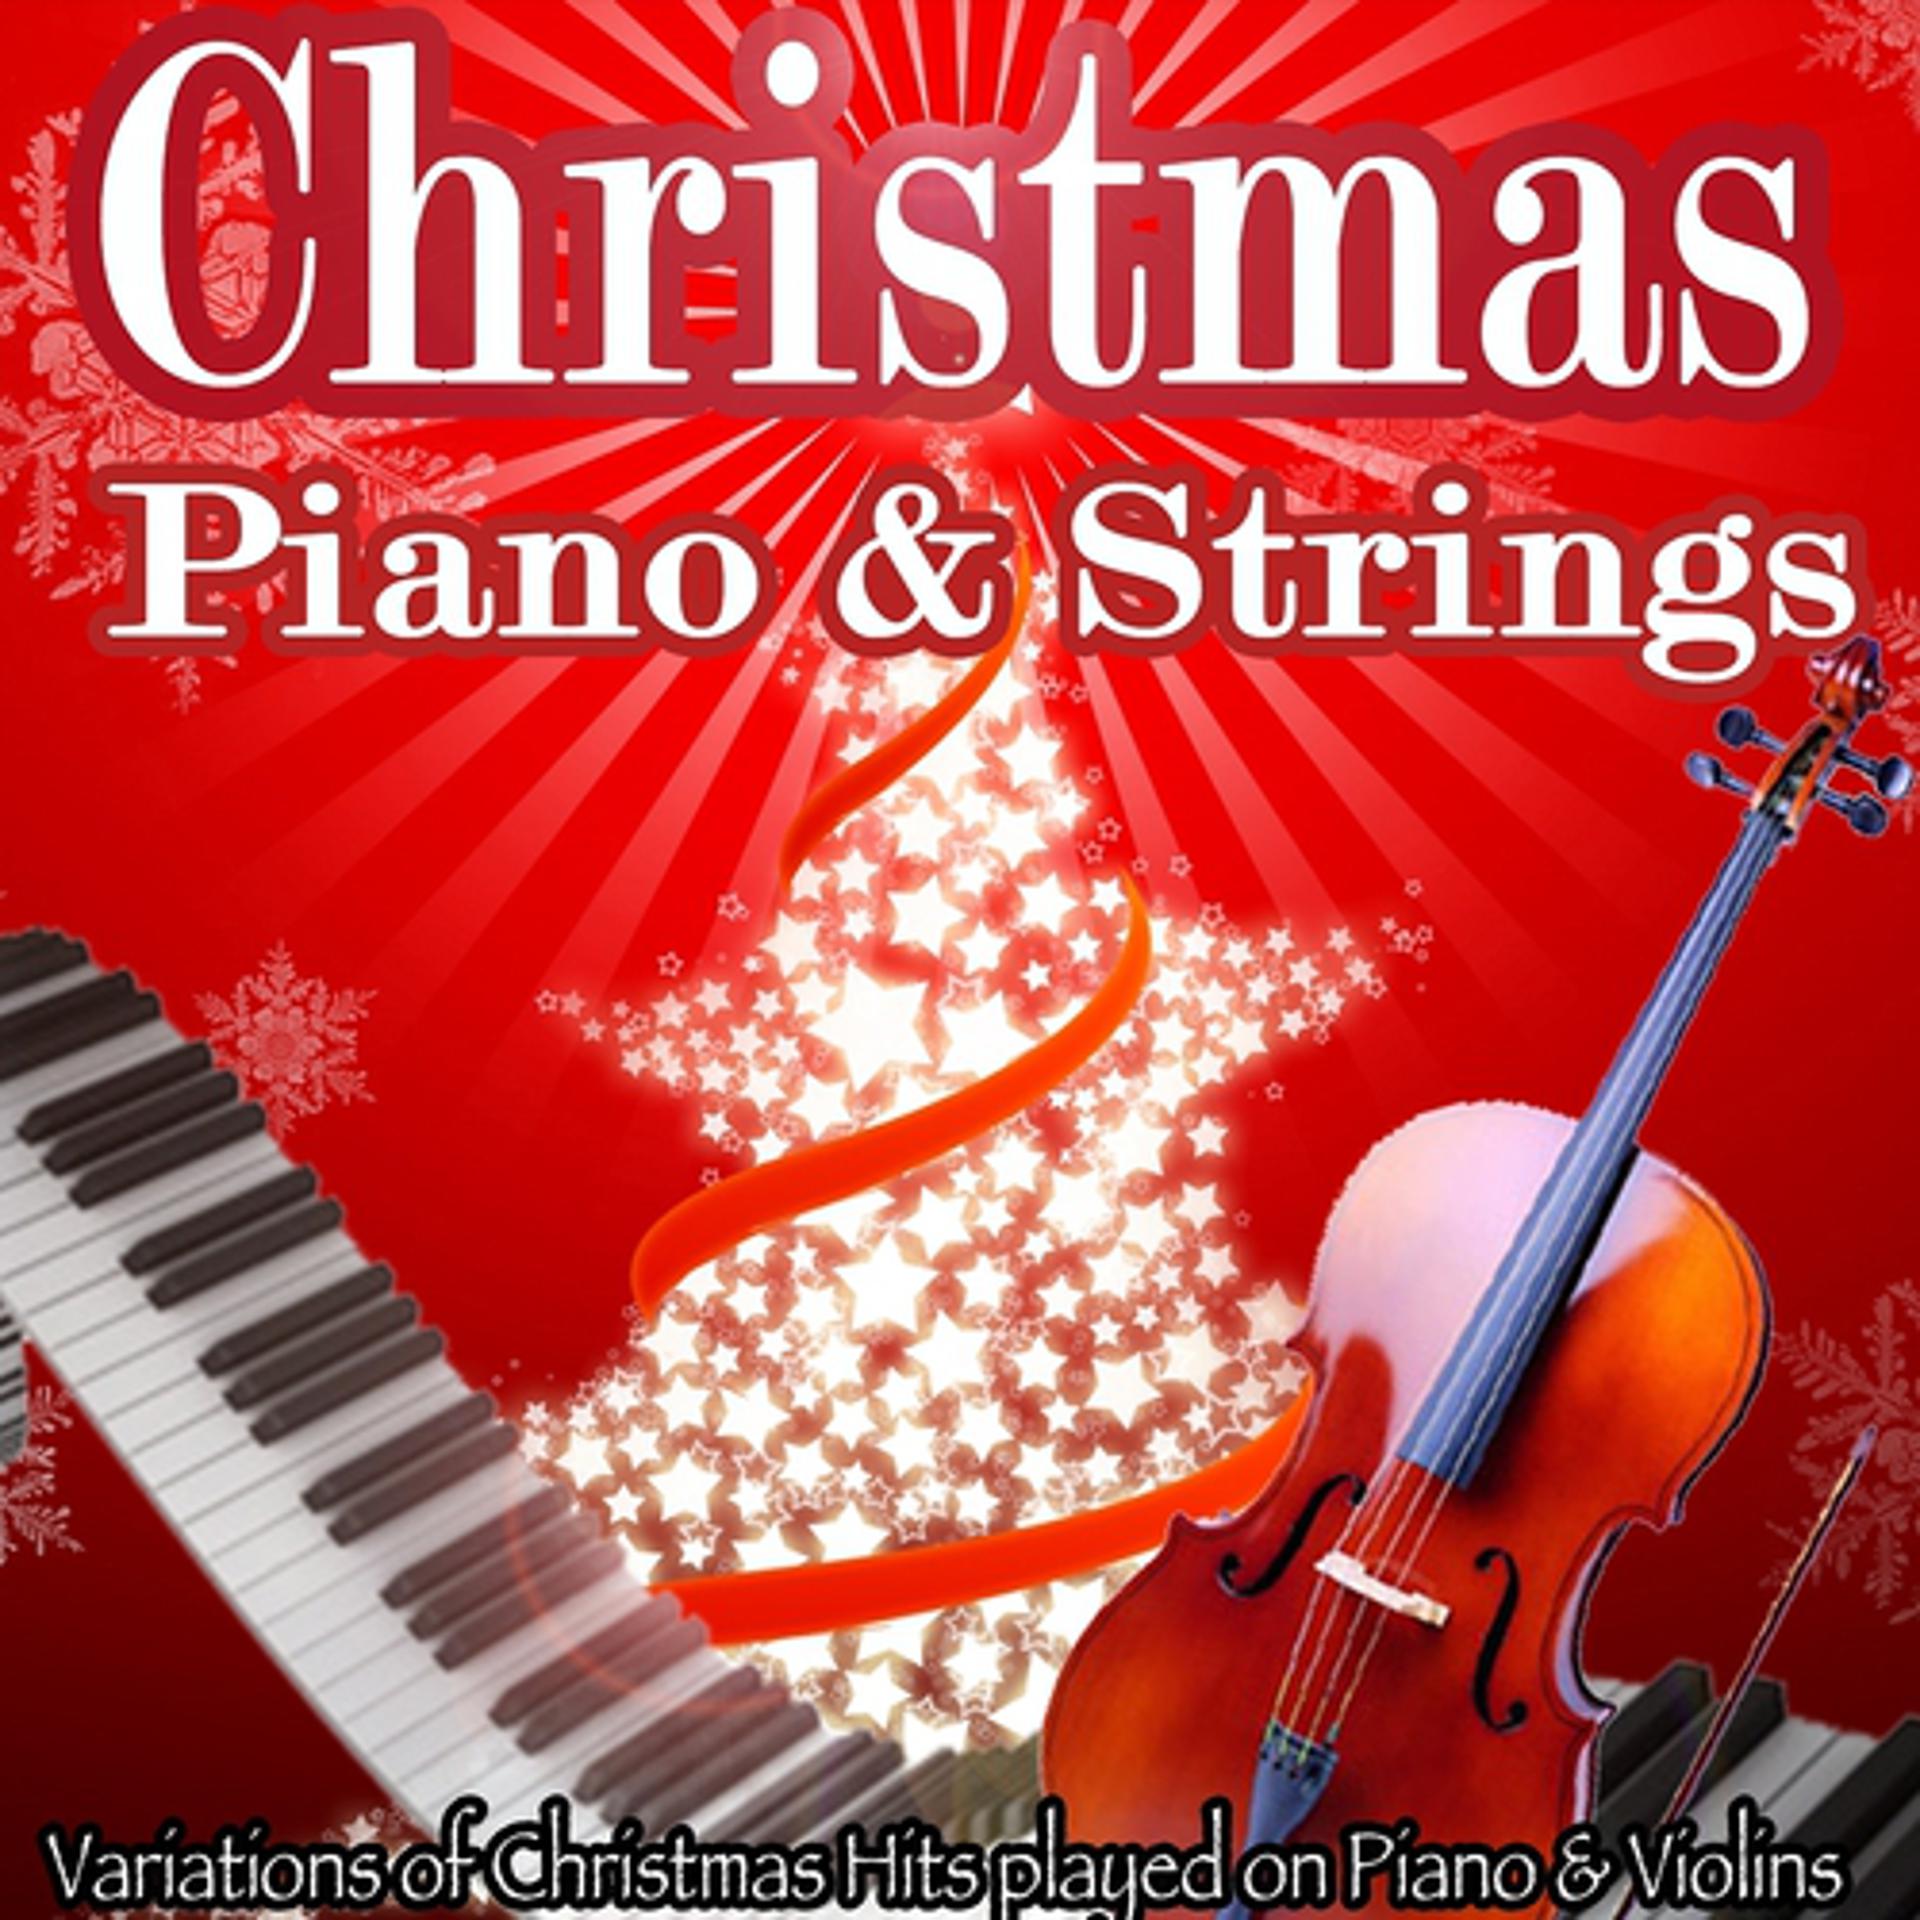 Постер альбома Christmas Hits on Piano and Strings (Variations of Christmas Hits played on Piano & Violins)